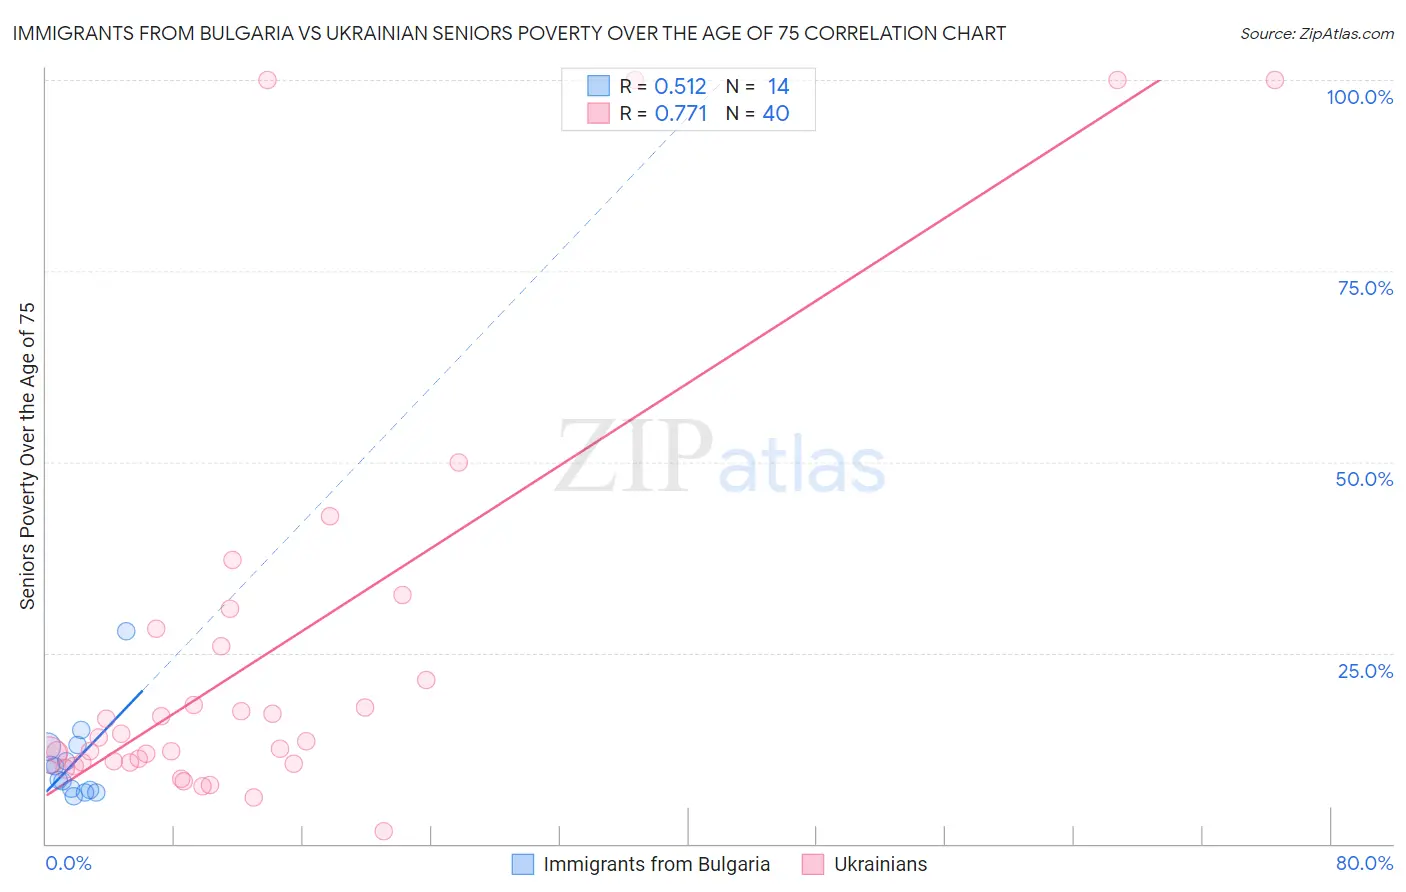 Immigrants from Bulgaria vs Ukrainian Seniors Poverty Over the Age of 75